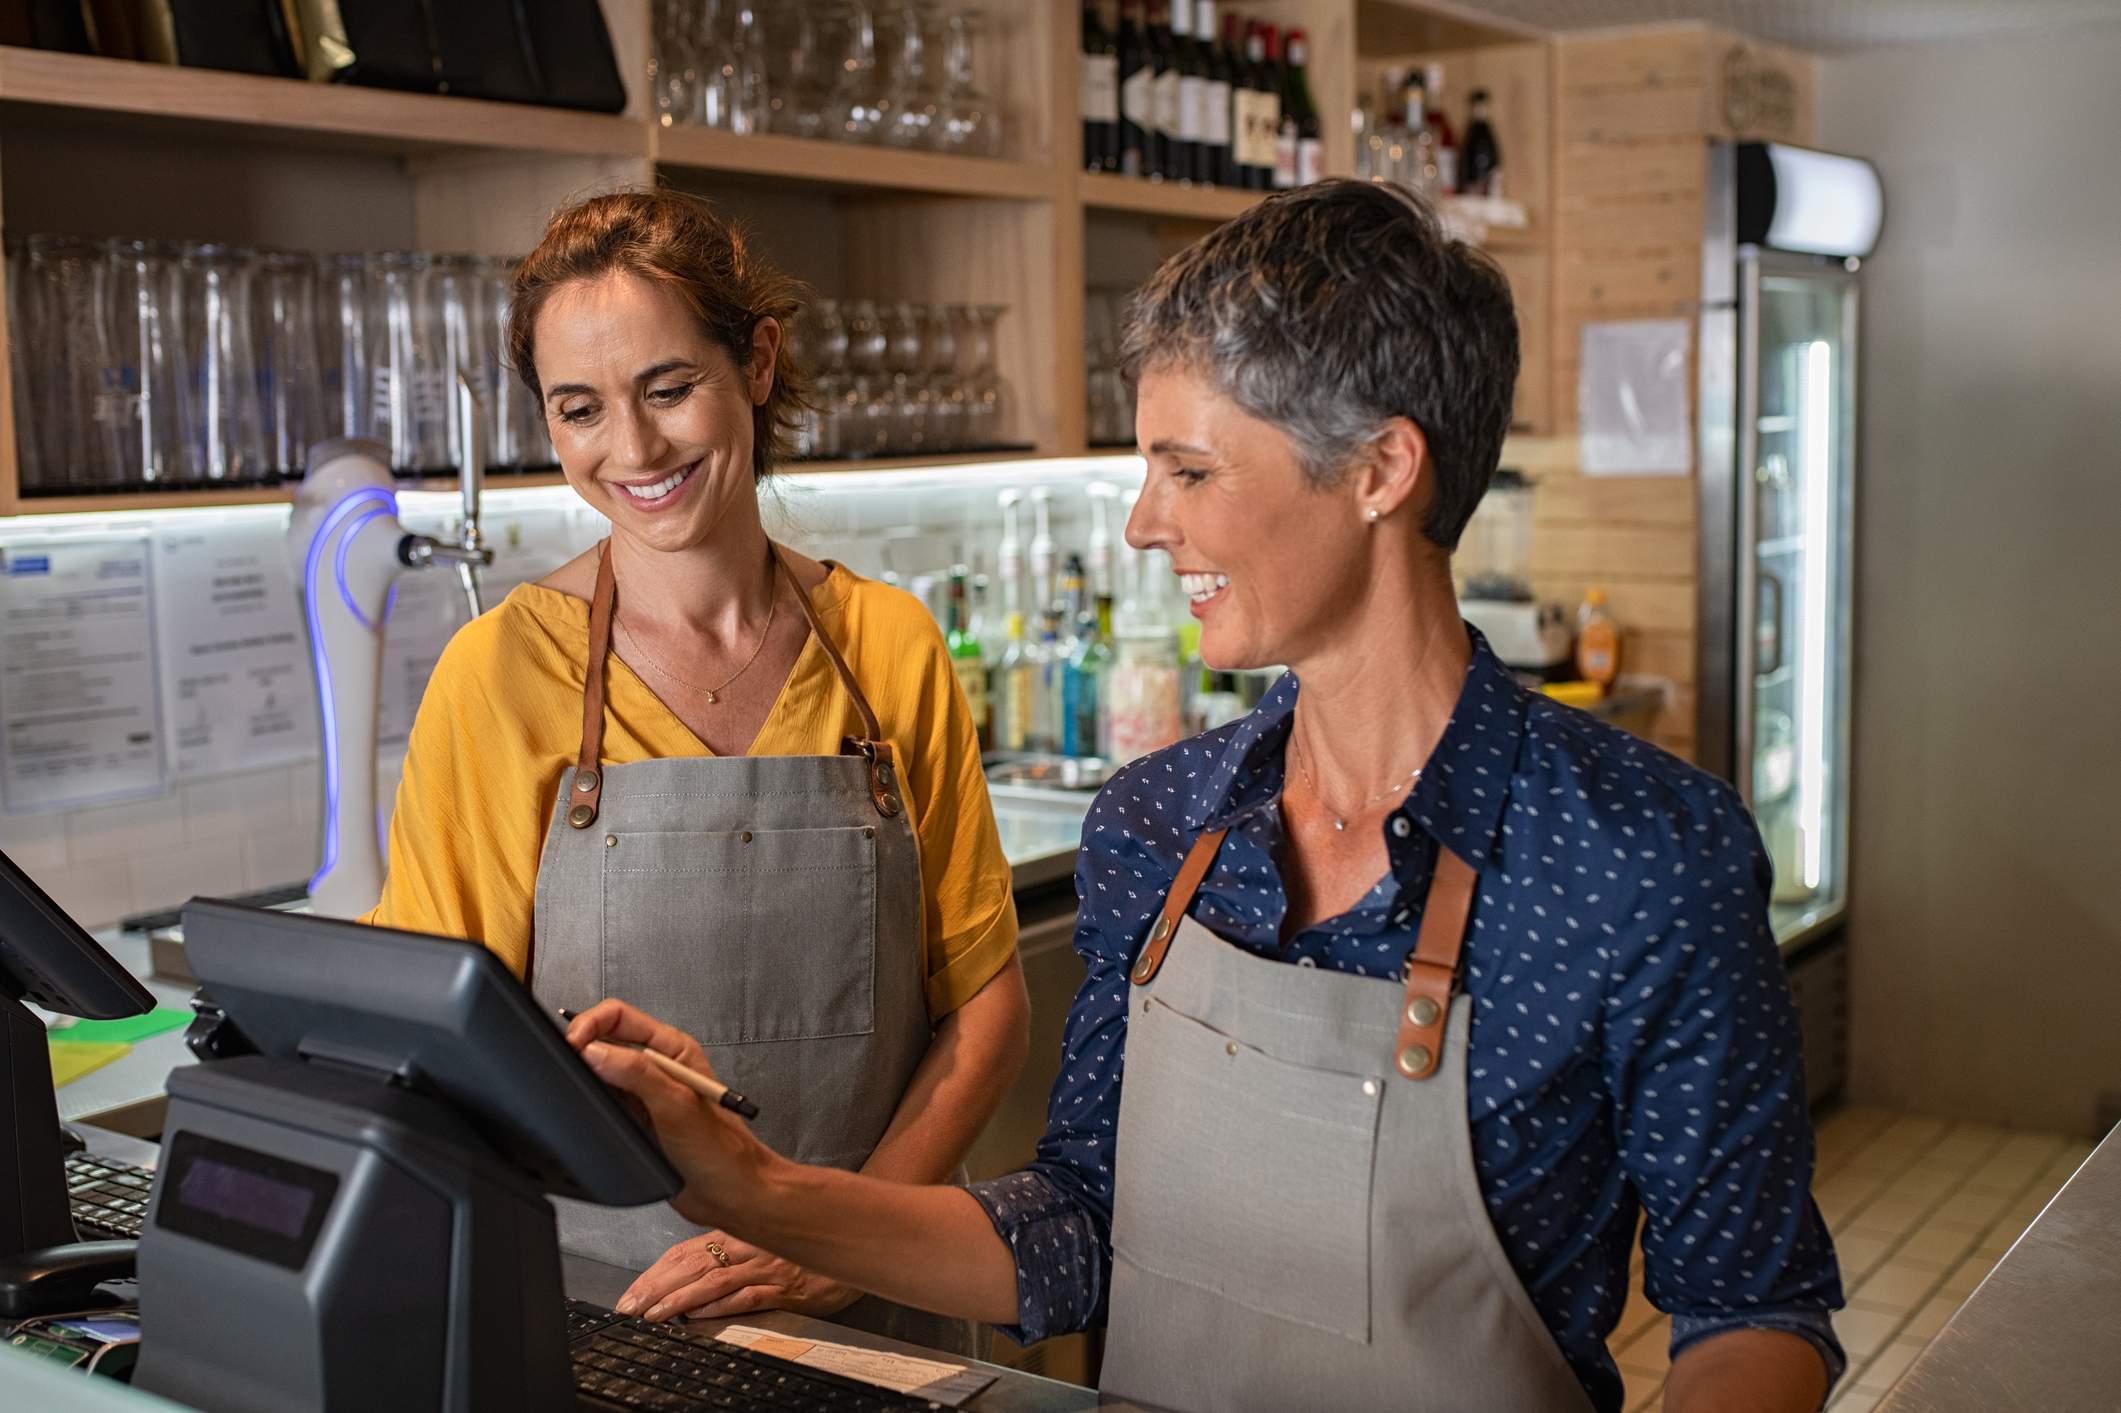 Image depicts two restaurant workers using their electronic ordering system.